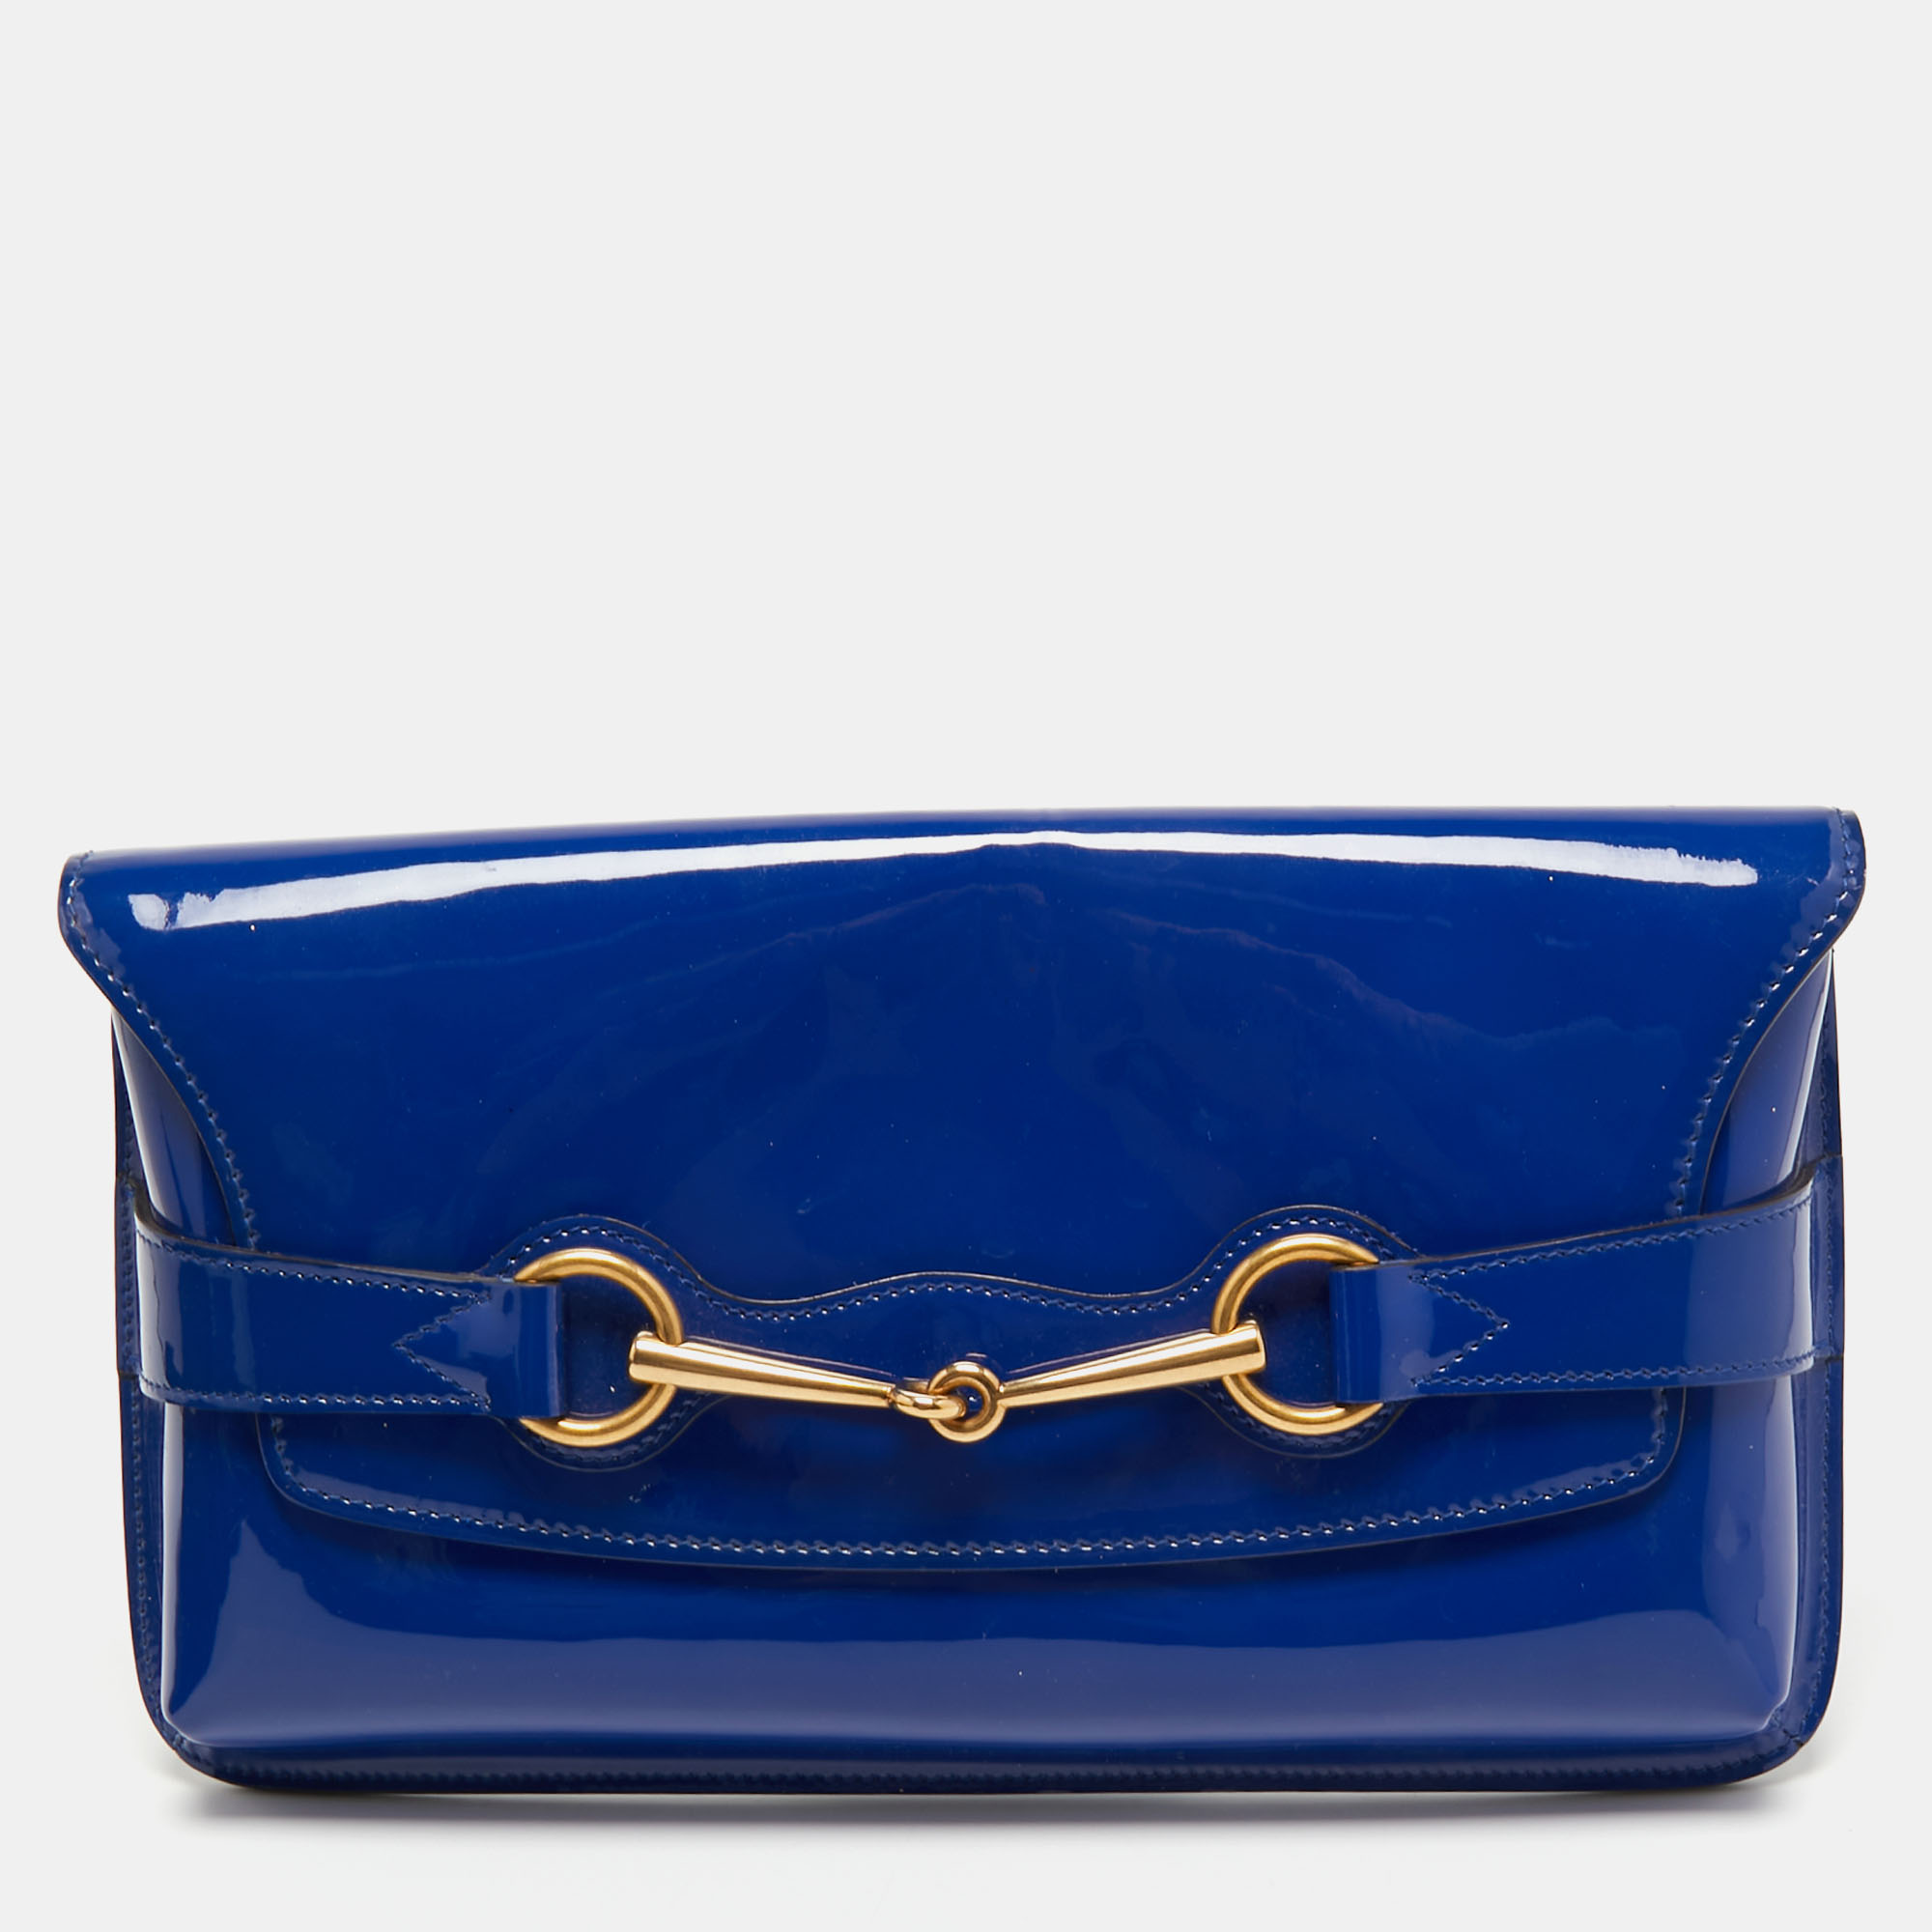 Pre-owned Gucci Royal Blue Patent Leather Bright Bit Clutch